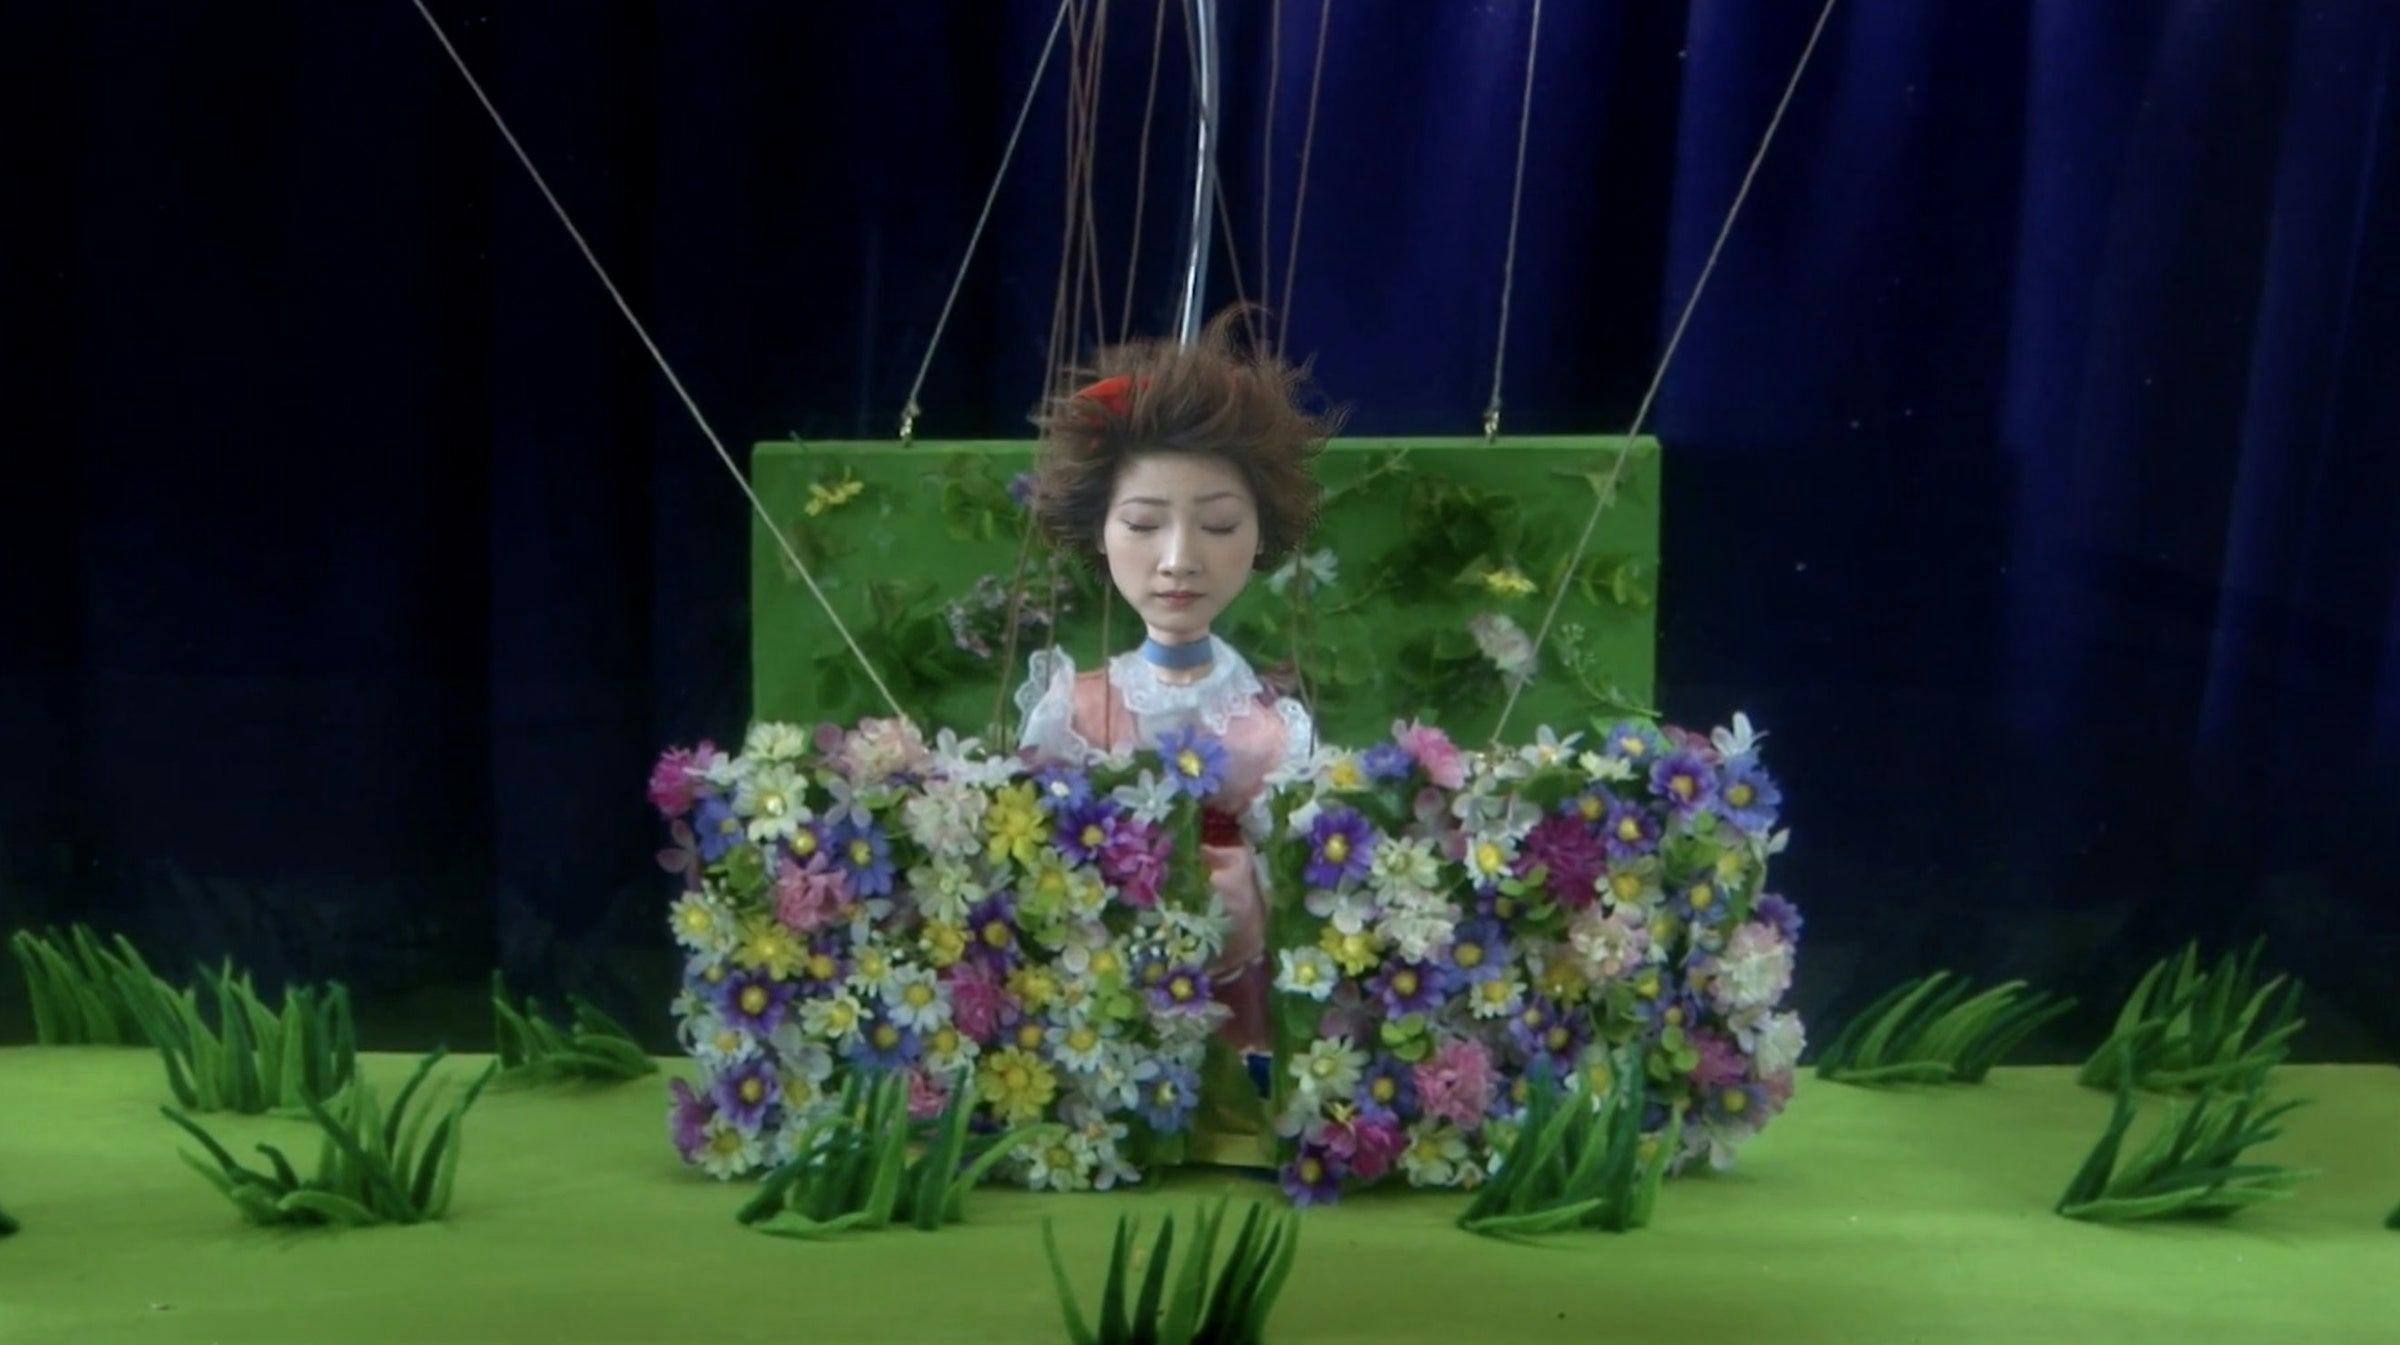 an image of a puppet whose strings are visible in a staged garden setting